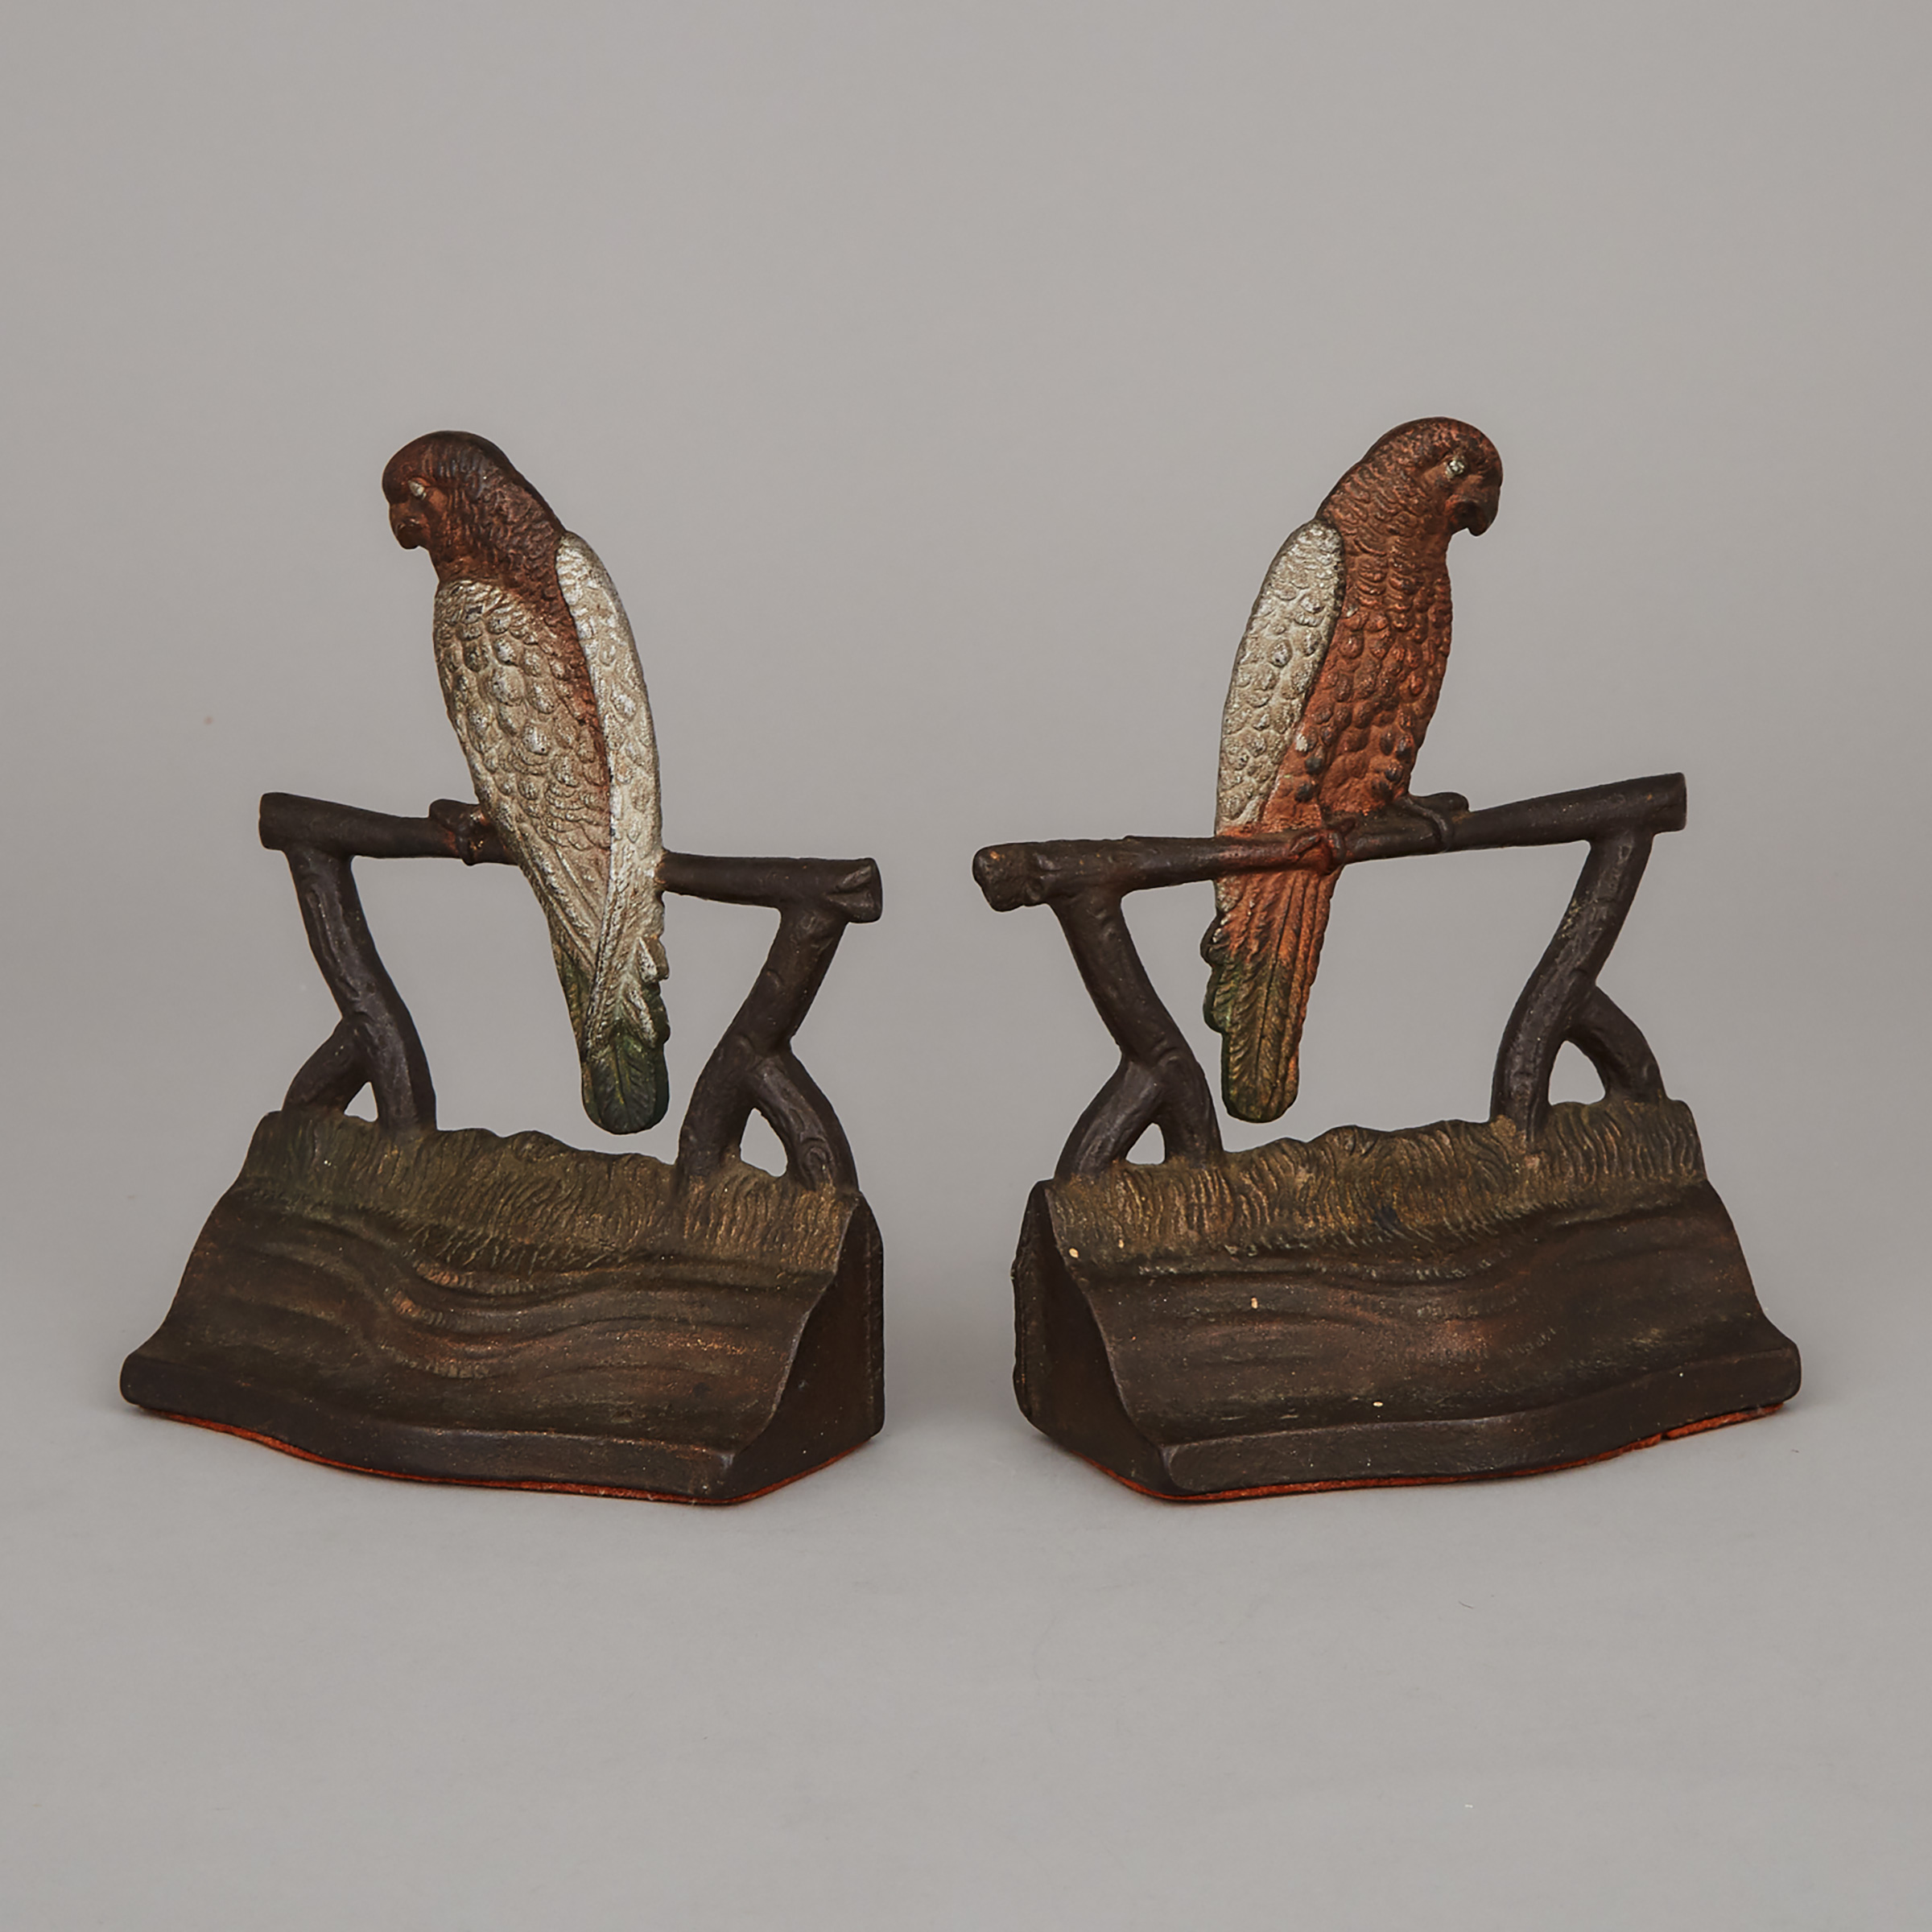 Pair of American Cold Painted Cast Iron Parrot Form Bookends, early 20th century